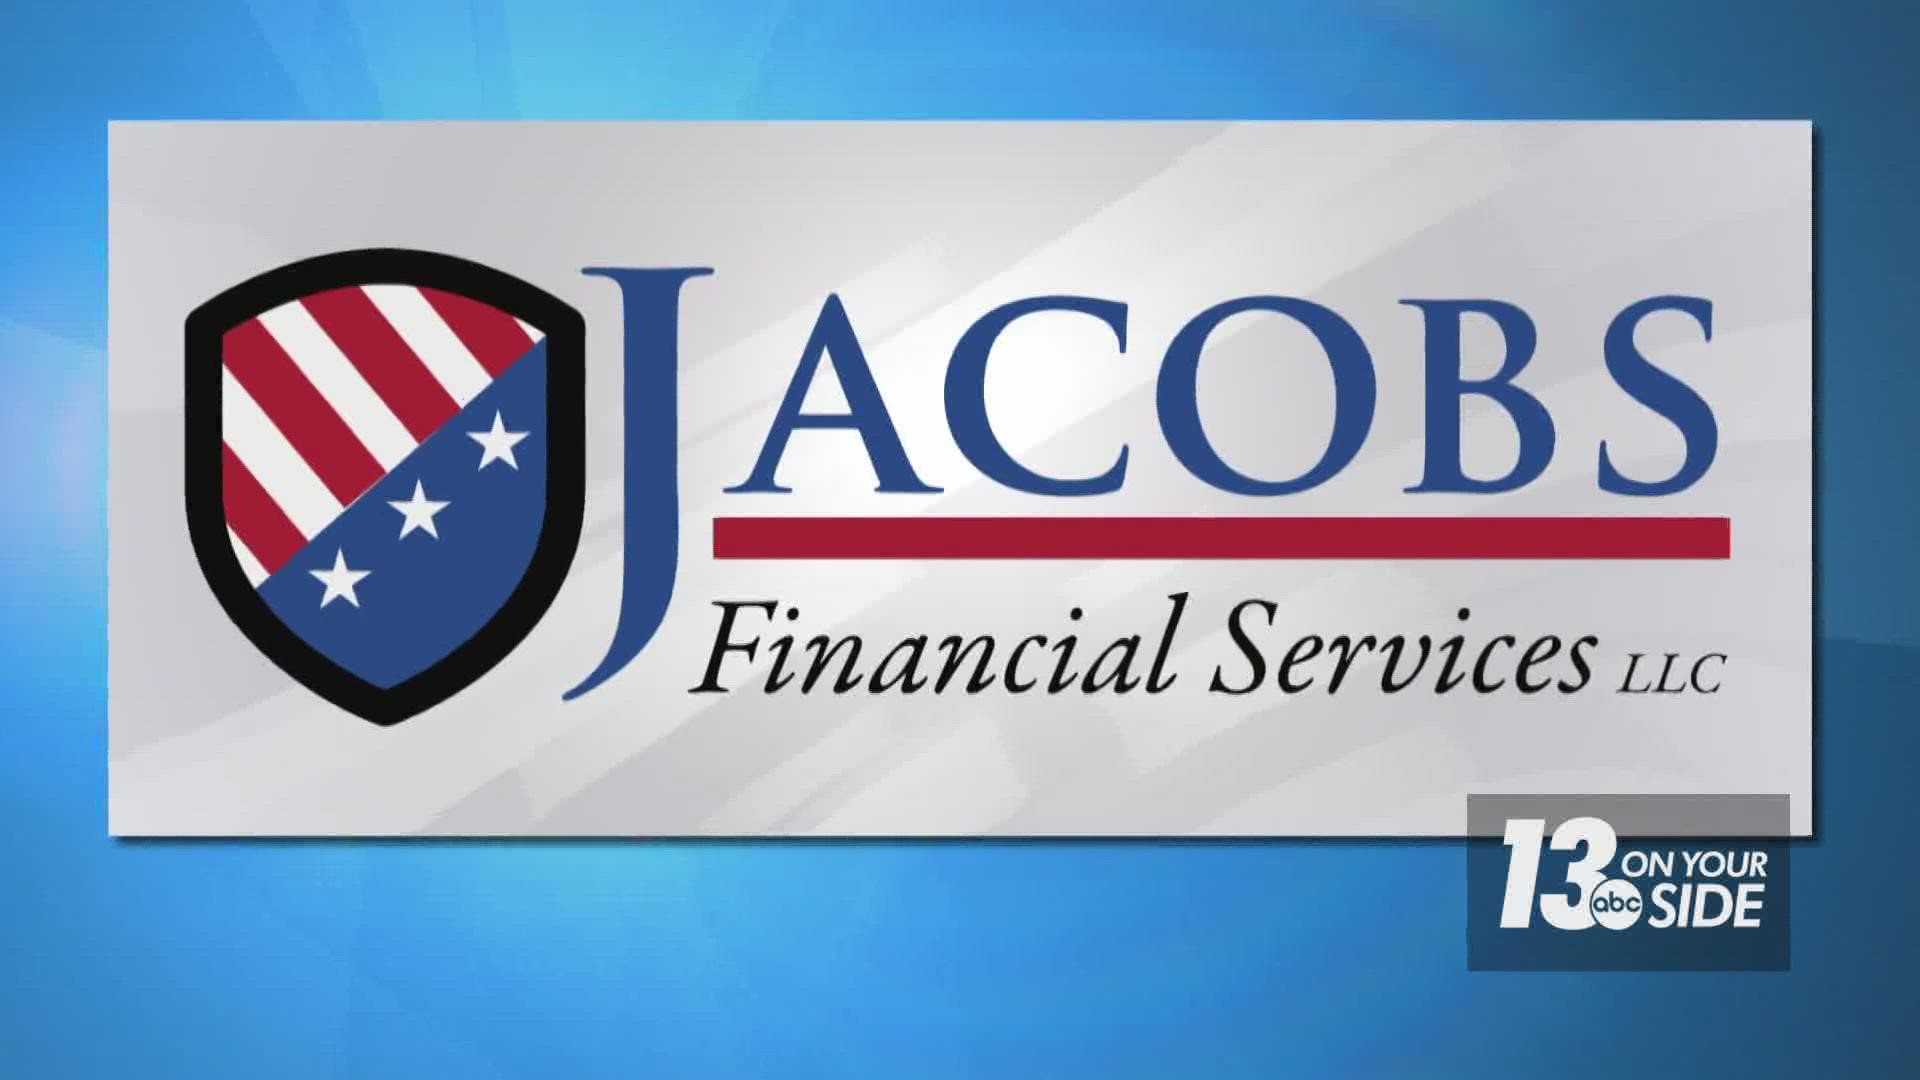 Tom Jacobs joined us from Jacobs Financial Services to tell us where to start.